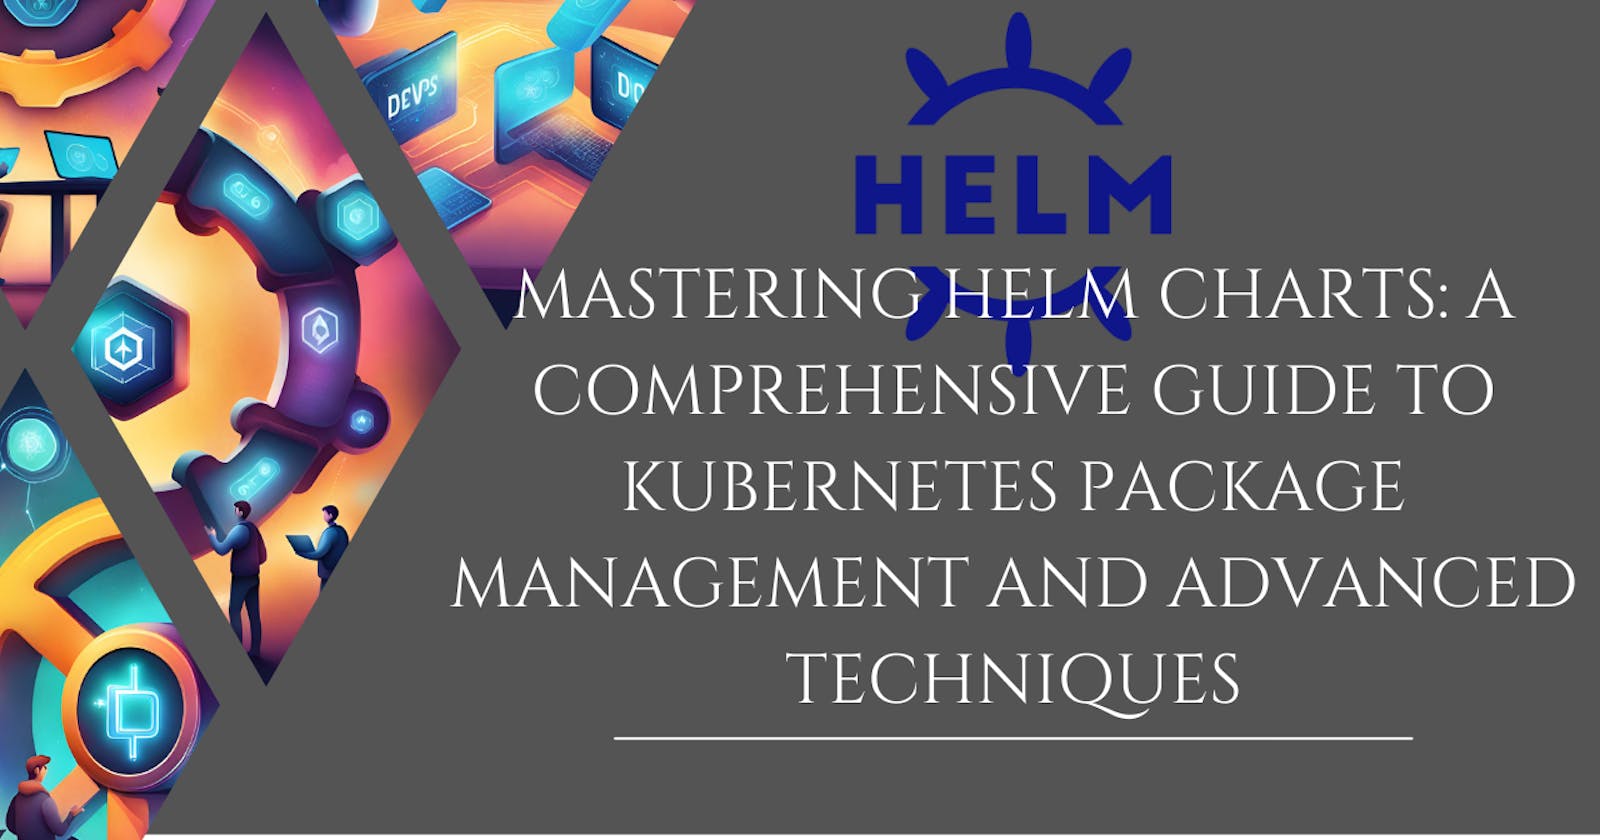 Mastering Helm Charts: A Comprehensive Guide to Kubernetes Package Management and Advanced Techniques